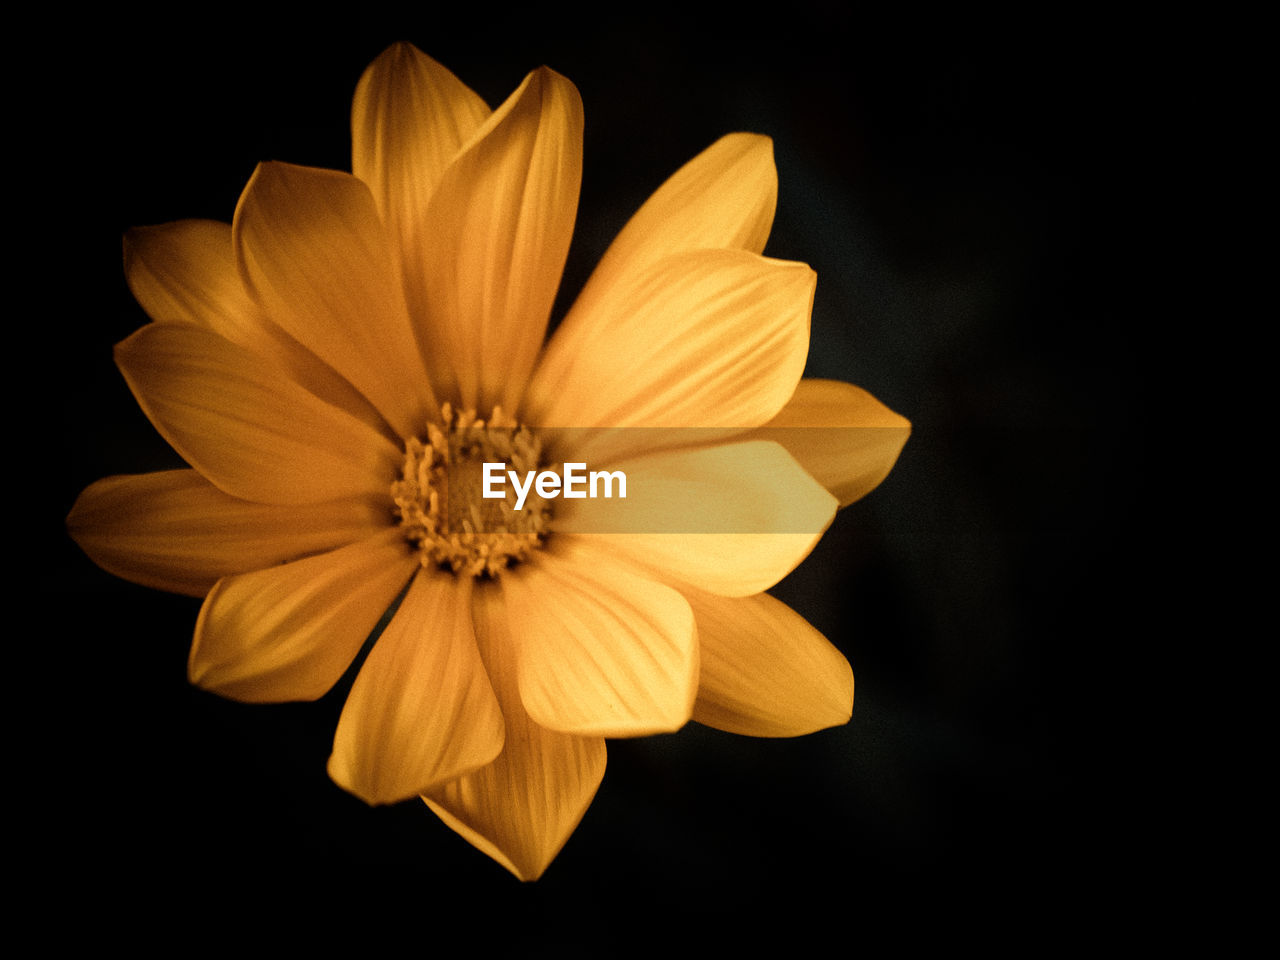 flower, petal, flower head, fragility, black background, pollen, beauty in nature, freshness, studio shot, blooming, nature, no people, growth, plant, close-up, black-eyed susan, outdoors, day